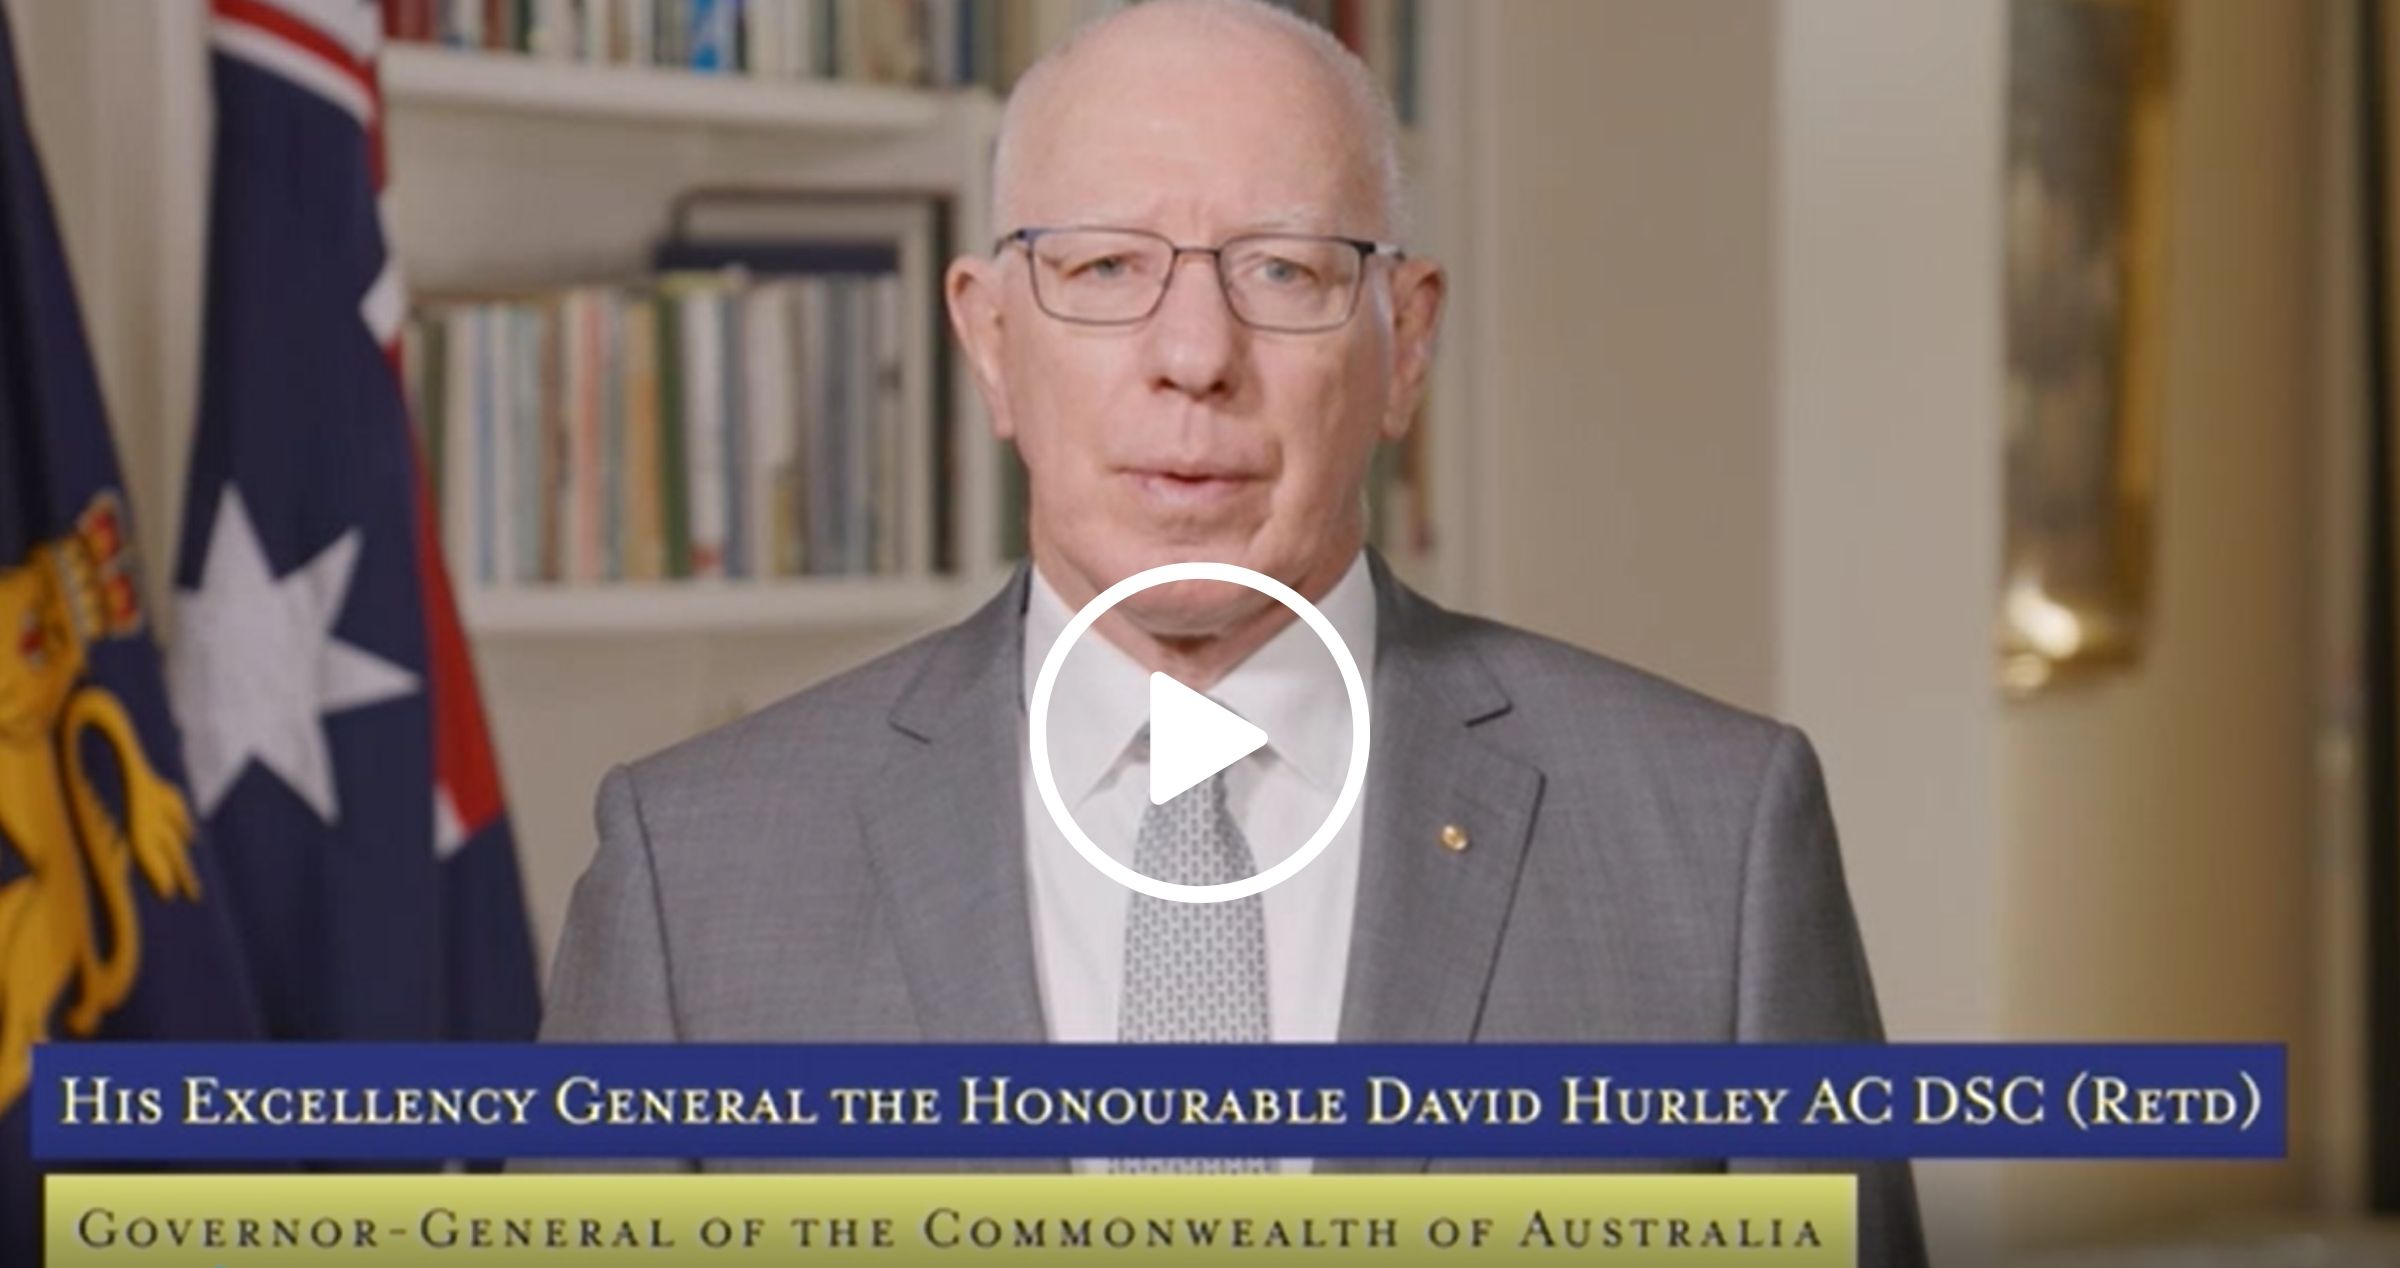 The Governor-General of Australia, His Excellency General the Honorable David Hurley AC DSC (Retd) 